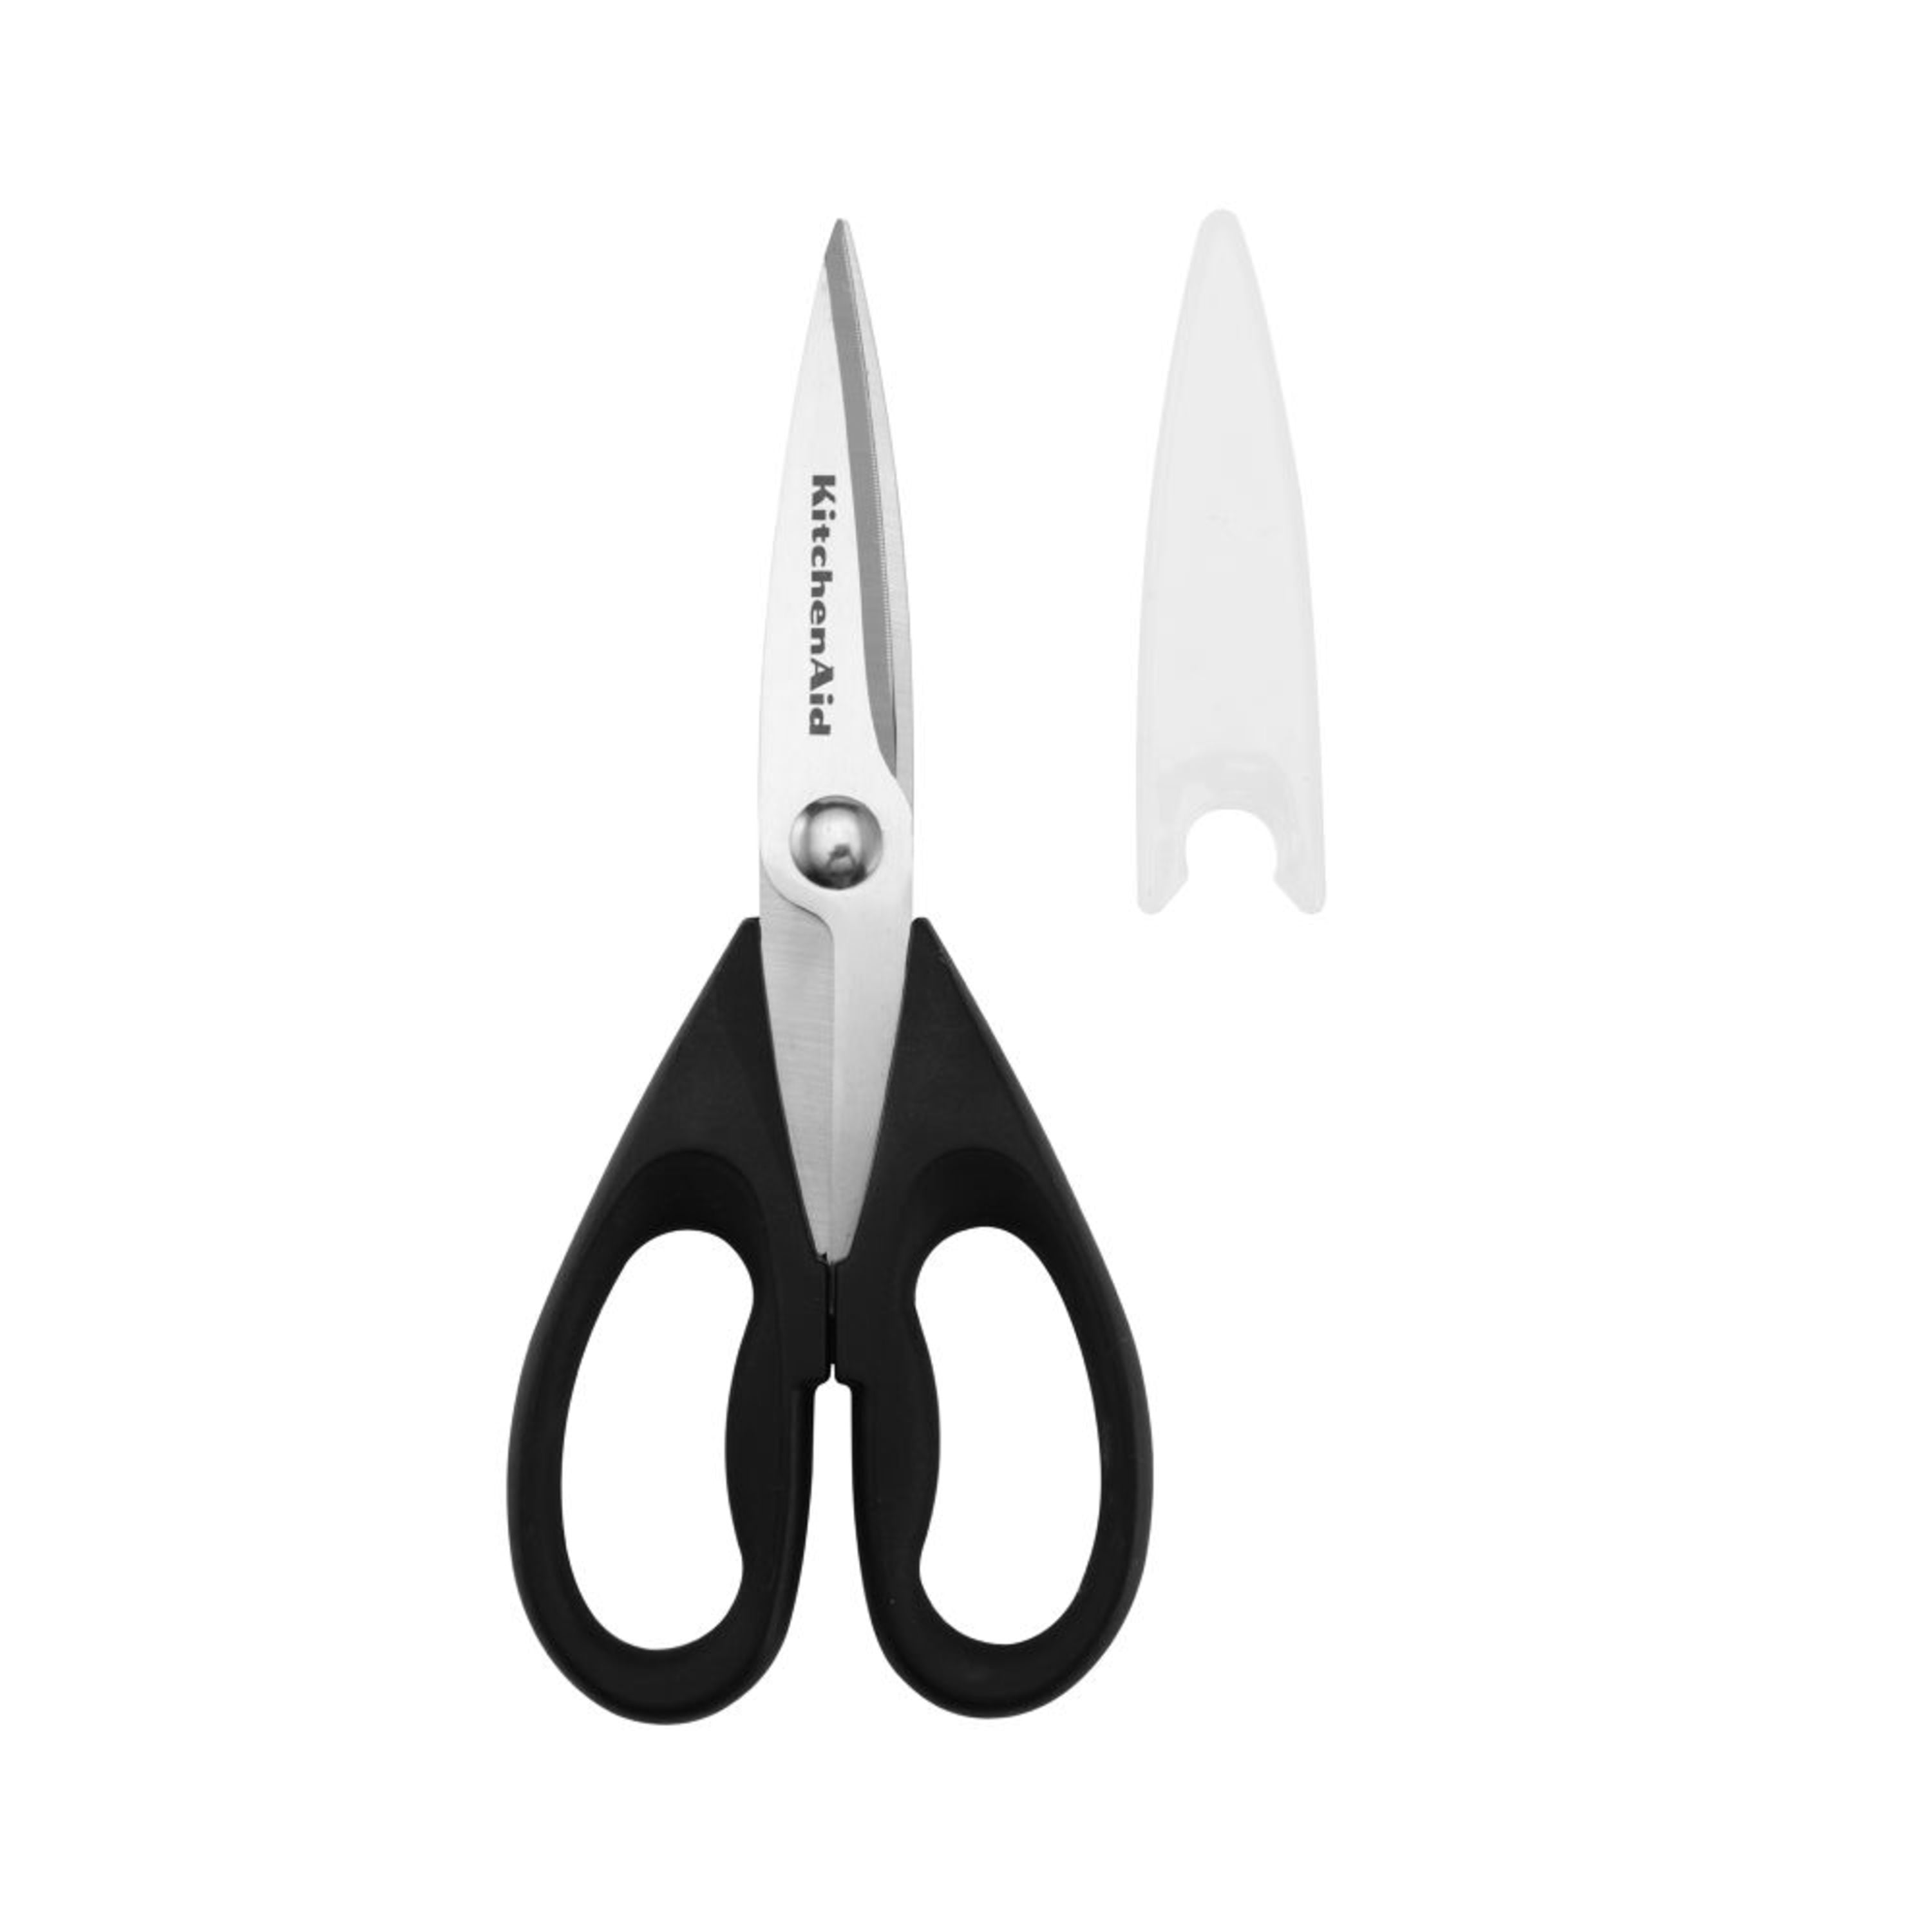 Kitchenaid Classic Shears With Soft Grip, Pistachio, Cutlery, Household